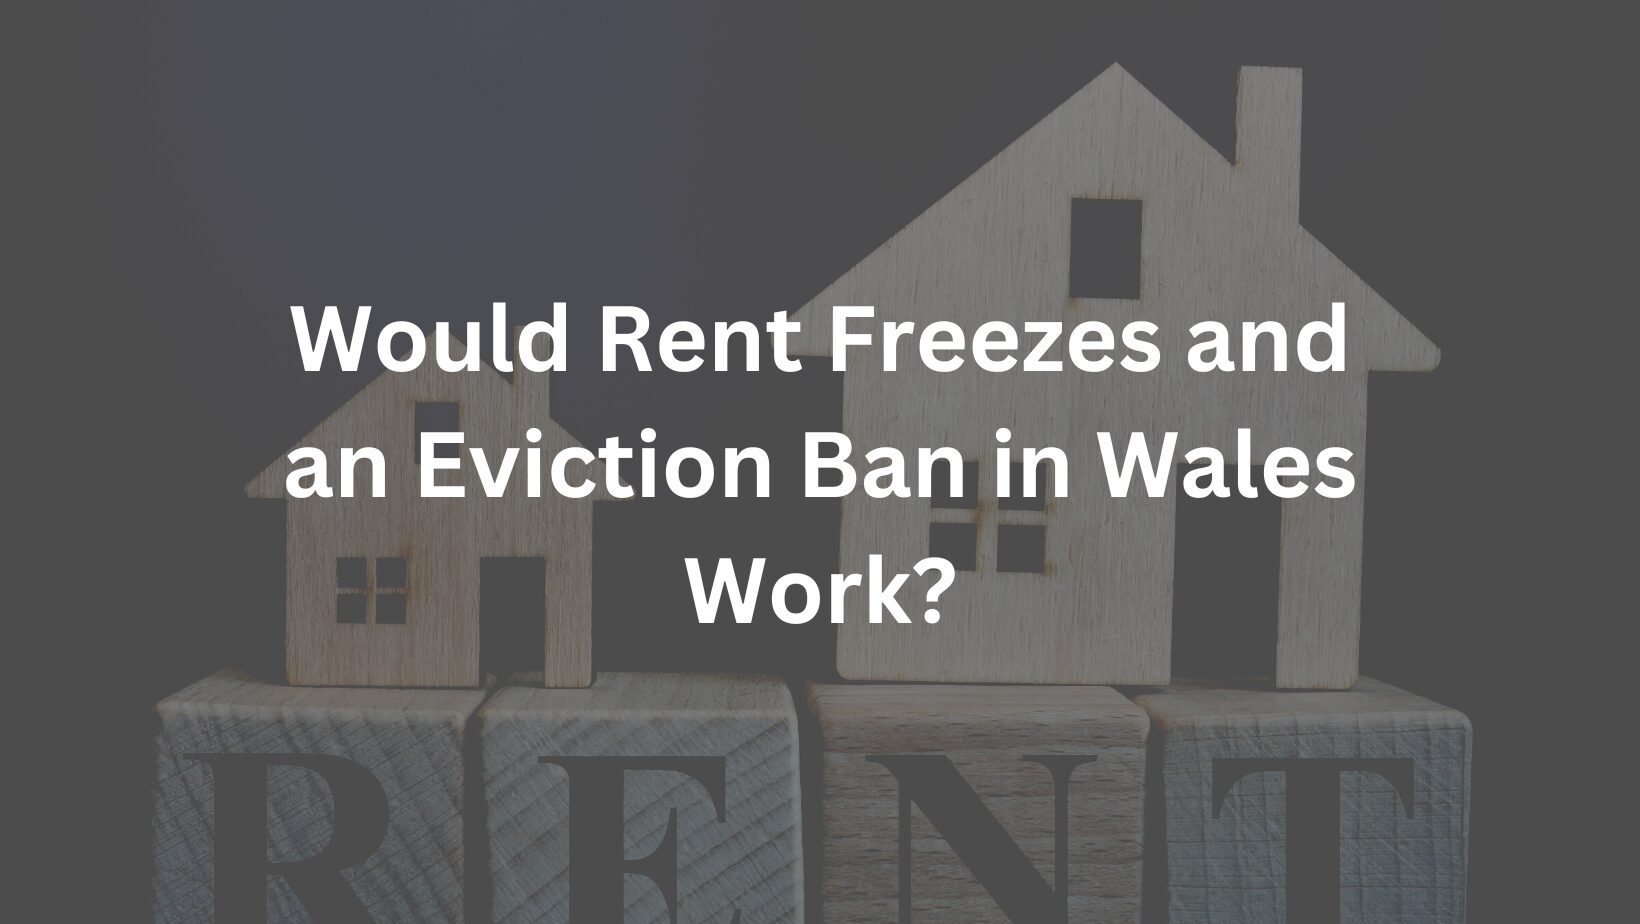 Would Rent Freezes and an Eviction Ban in Wales Work?